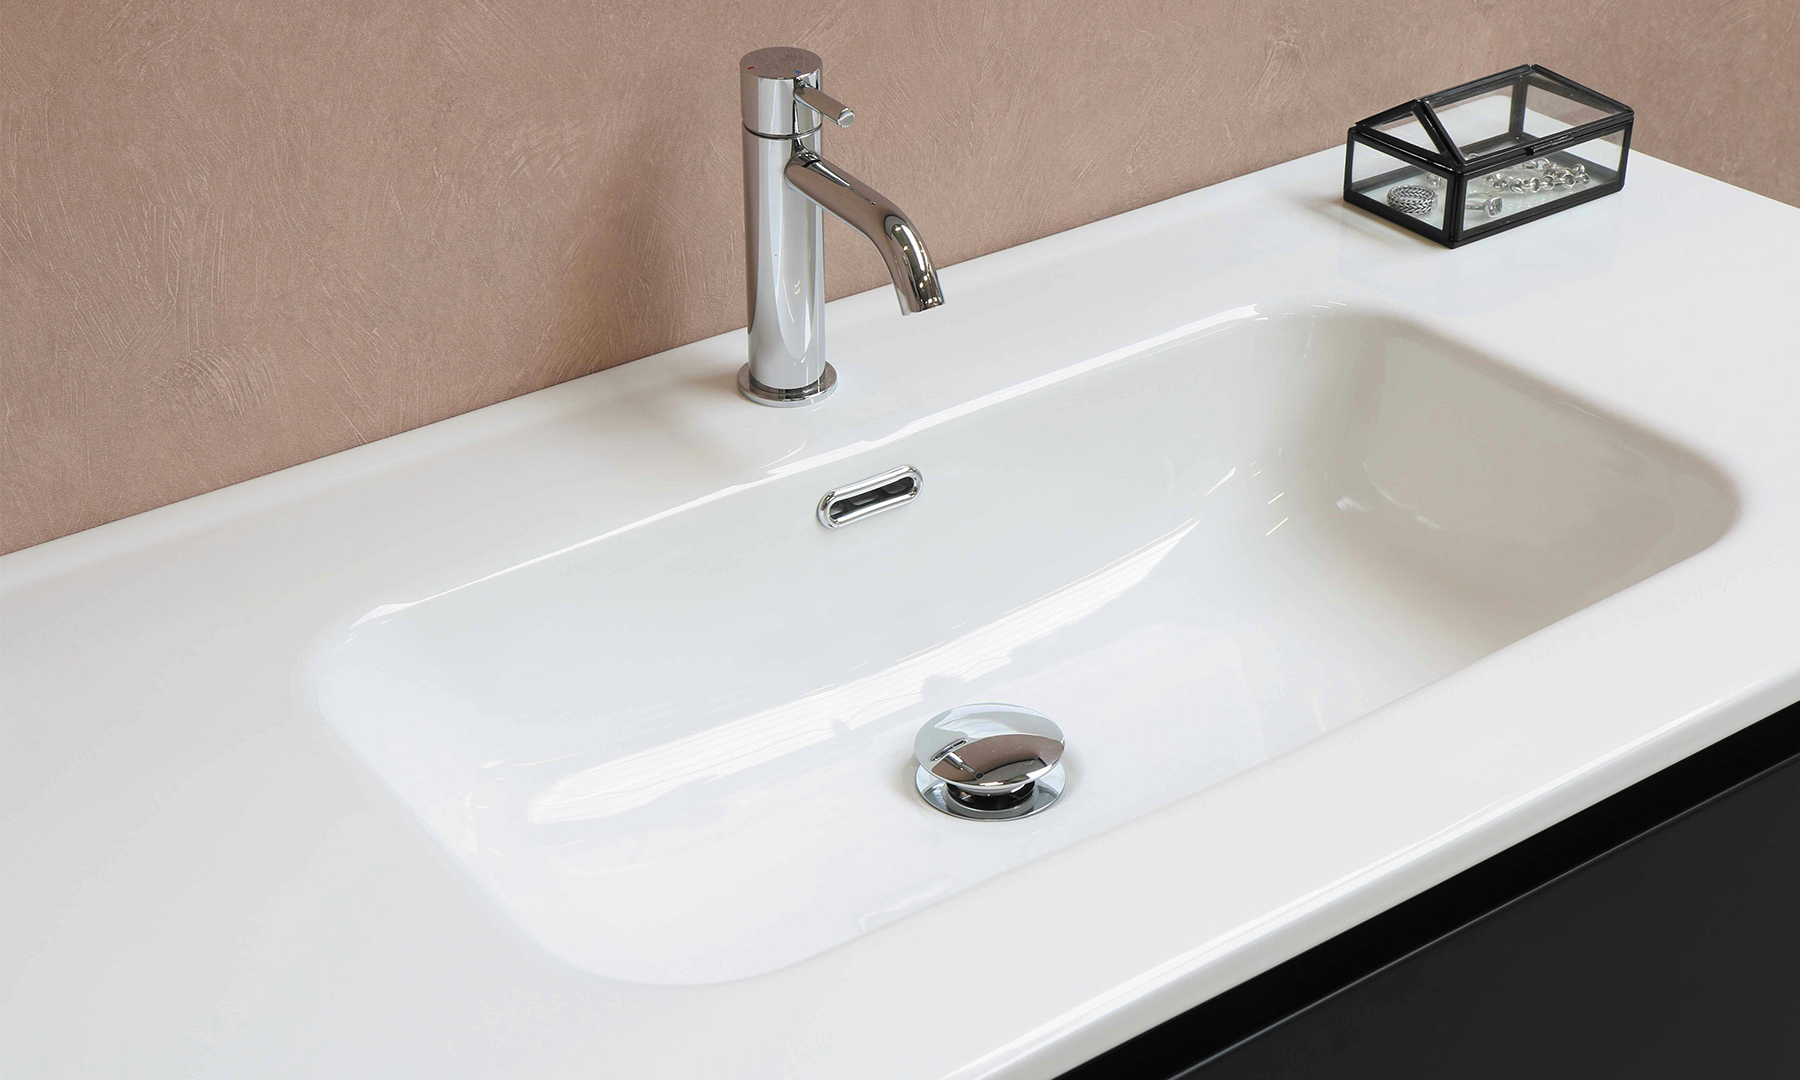 White vanity top sink with chrome faucet